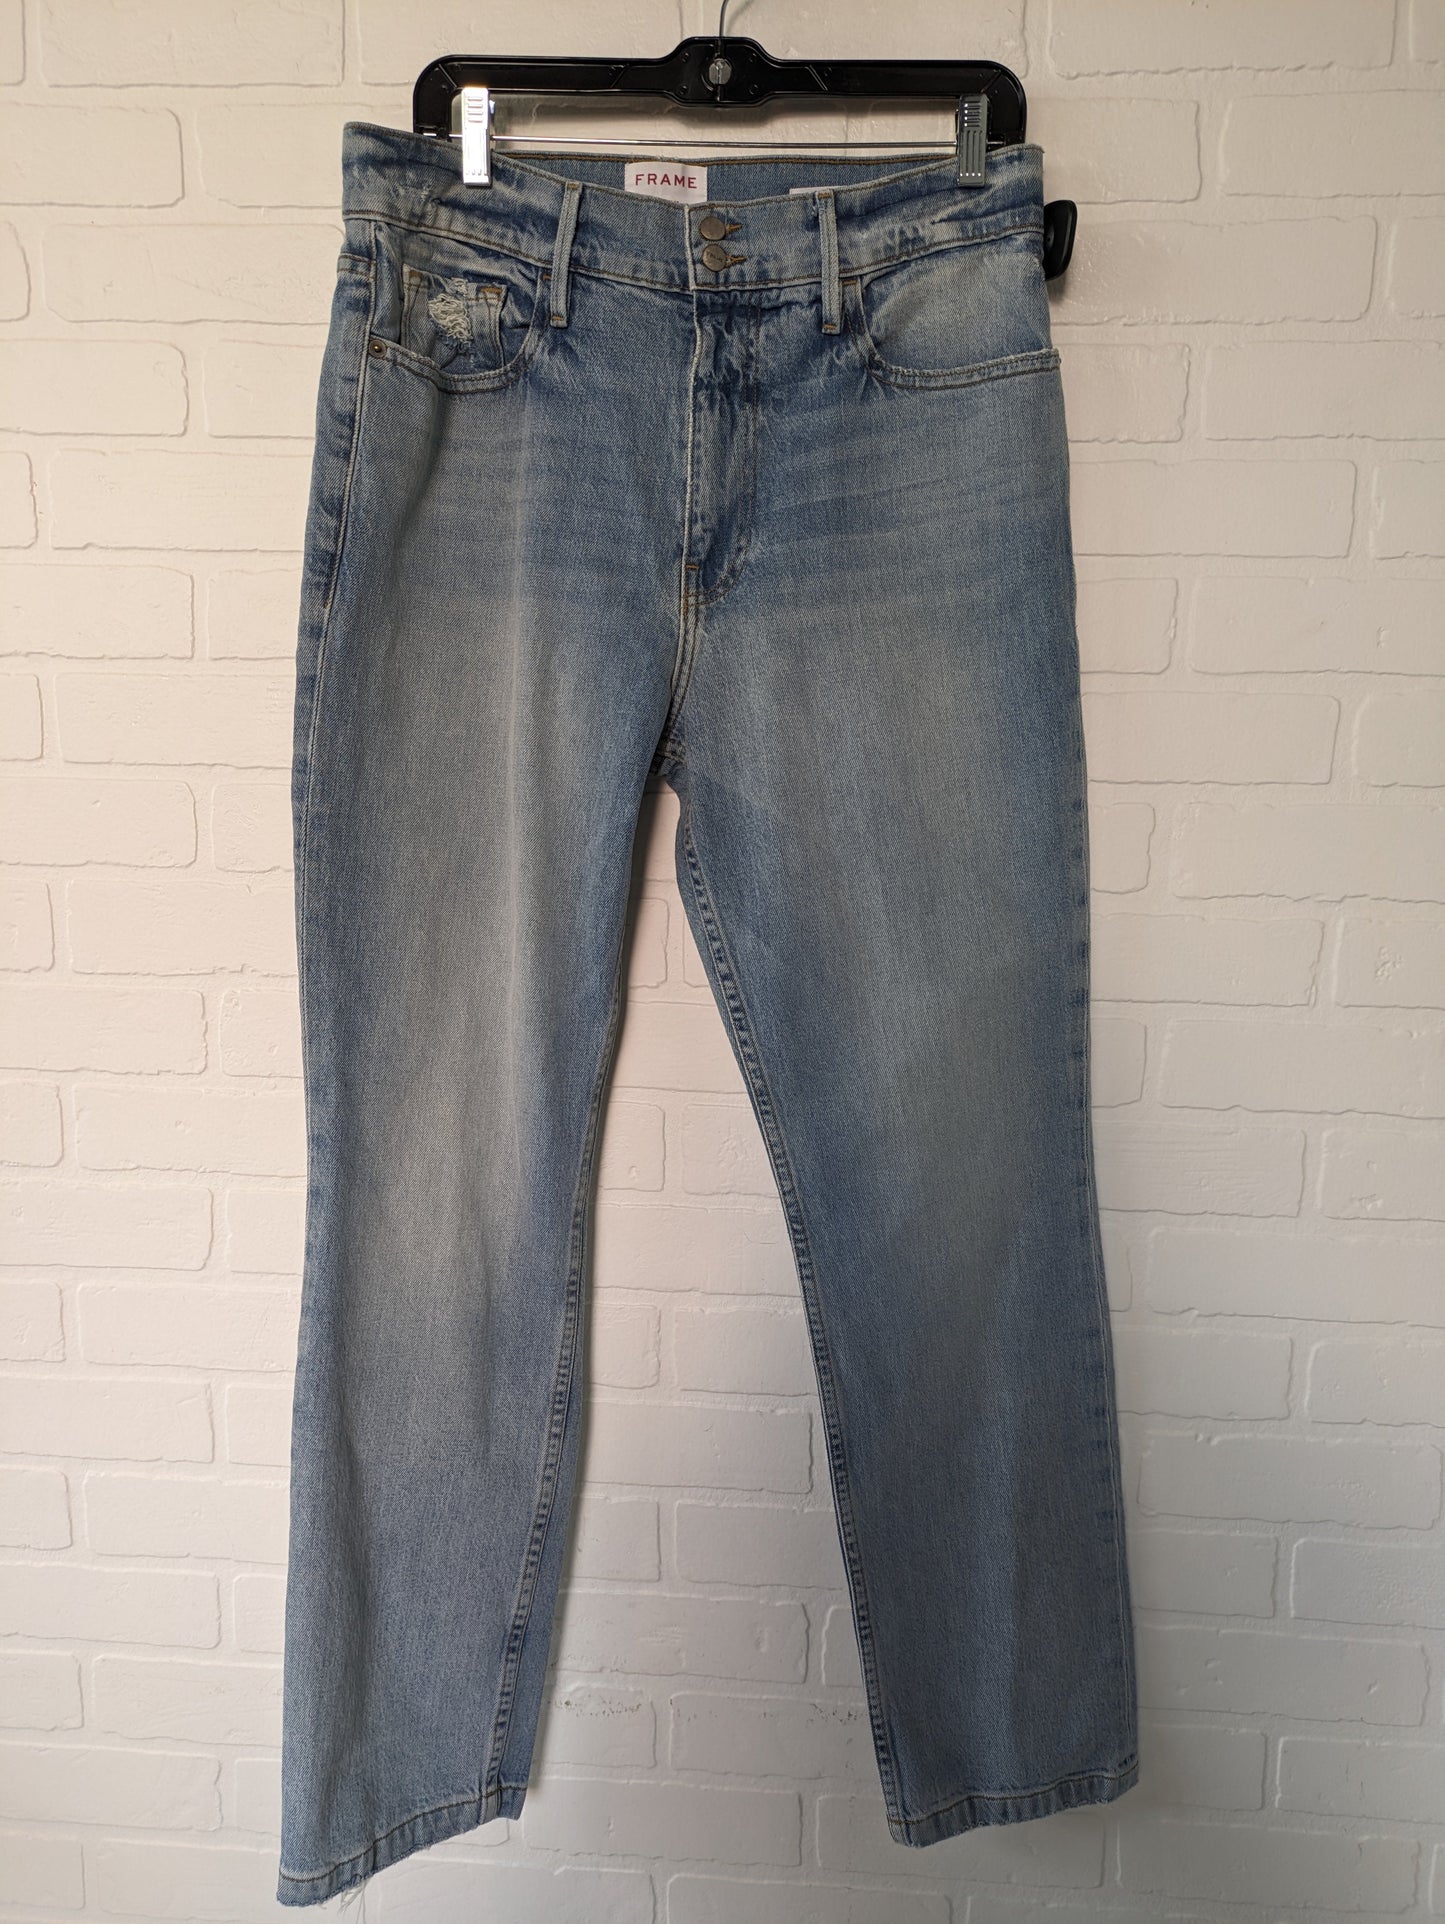 Jeans Straight By Frame  Size: 12